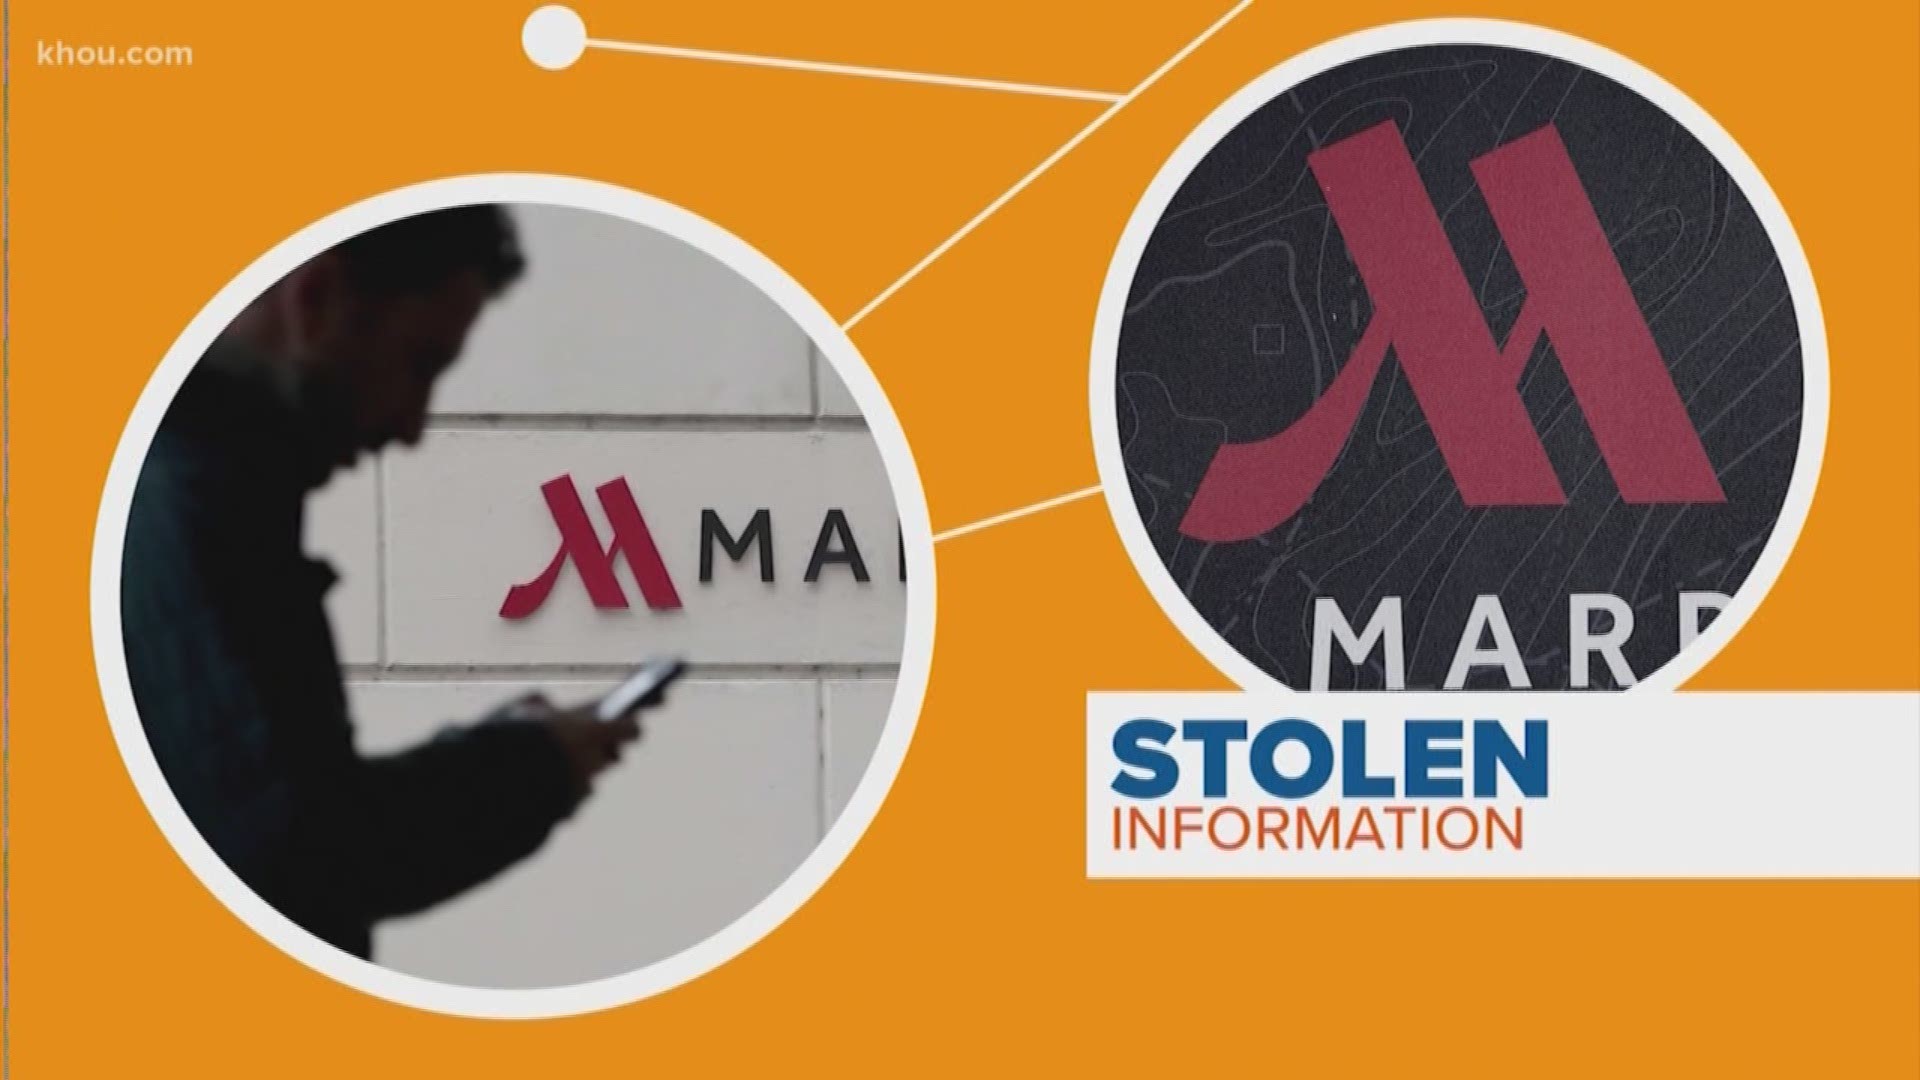 We're learning more about a major data breach - roughly 500 million Marriott guests had their info taken. But this isn't your average hack. Our Janelle Bludau connects the dots.